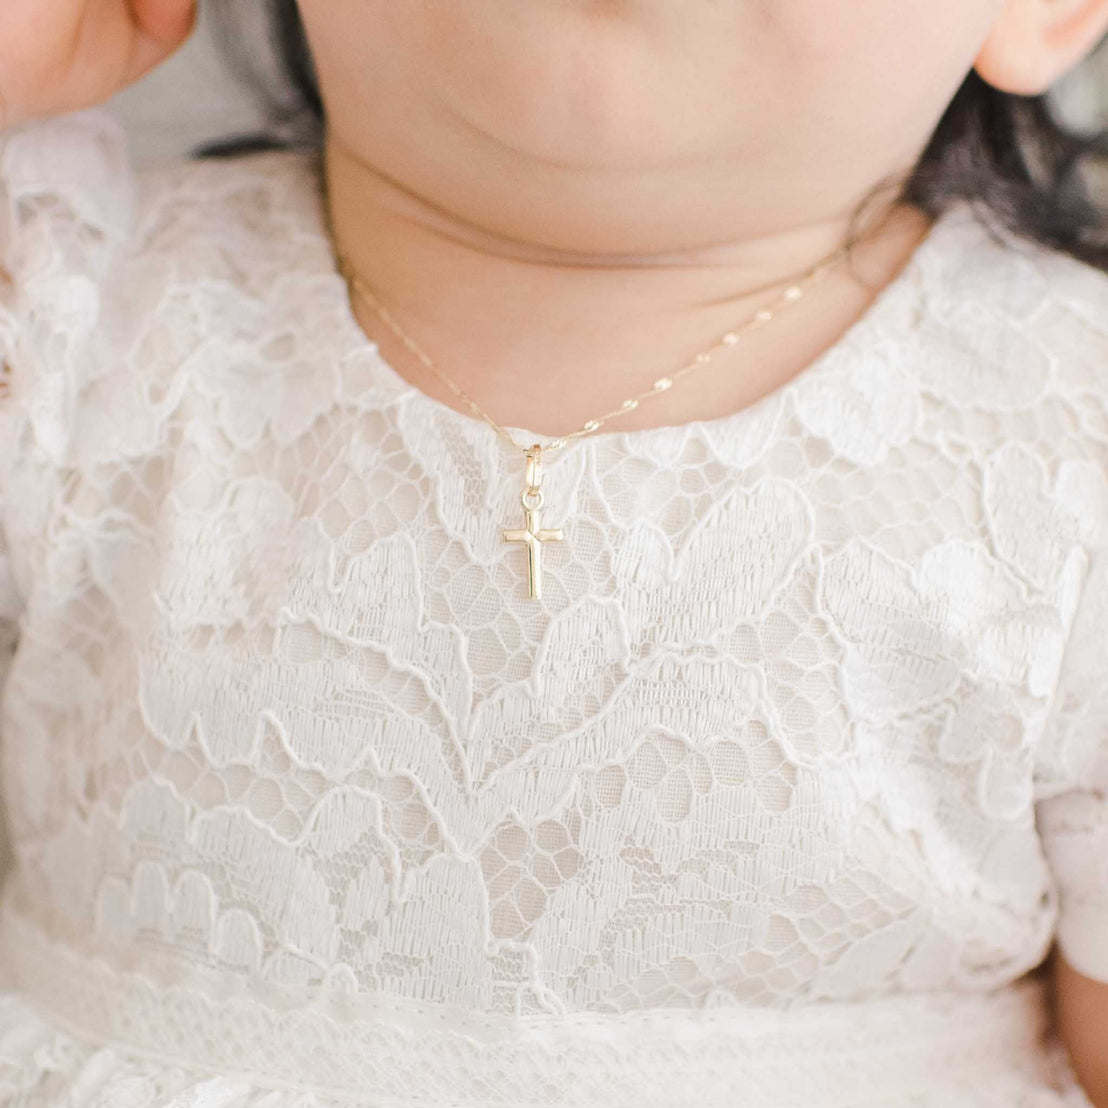 Small gold cross charm necklace on baby